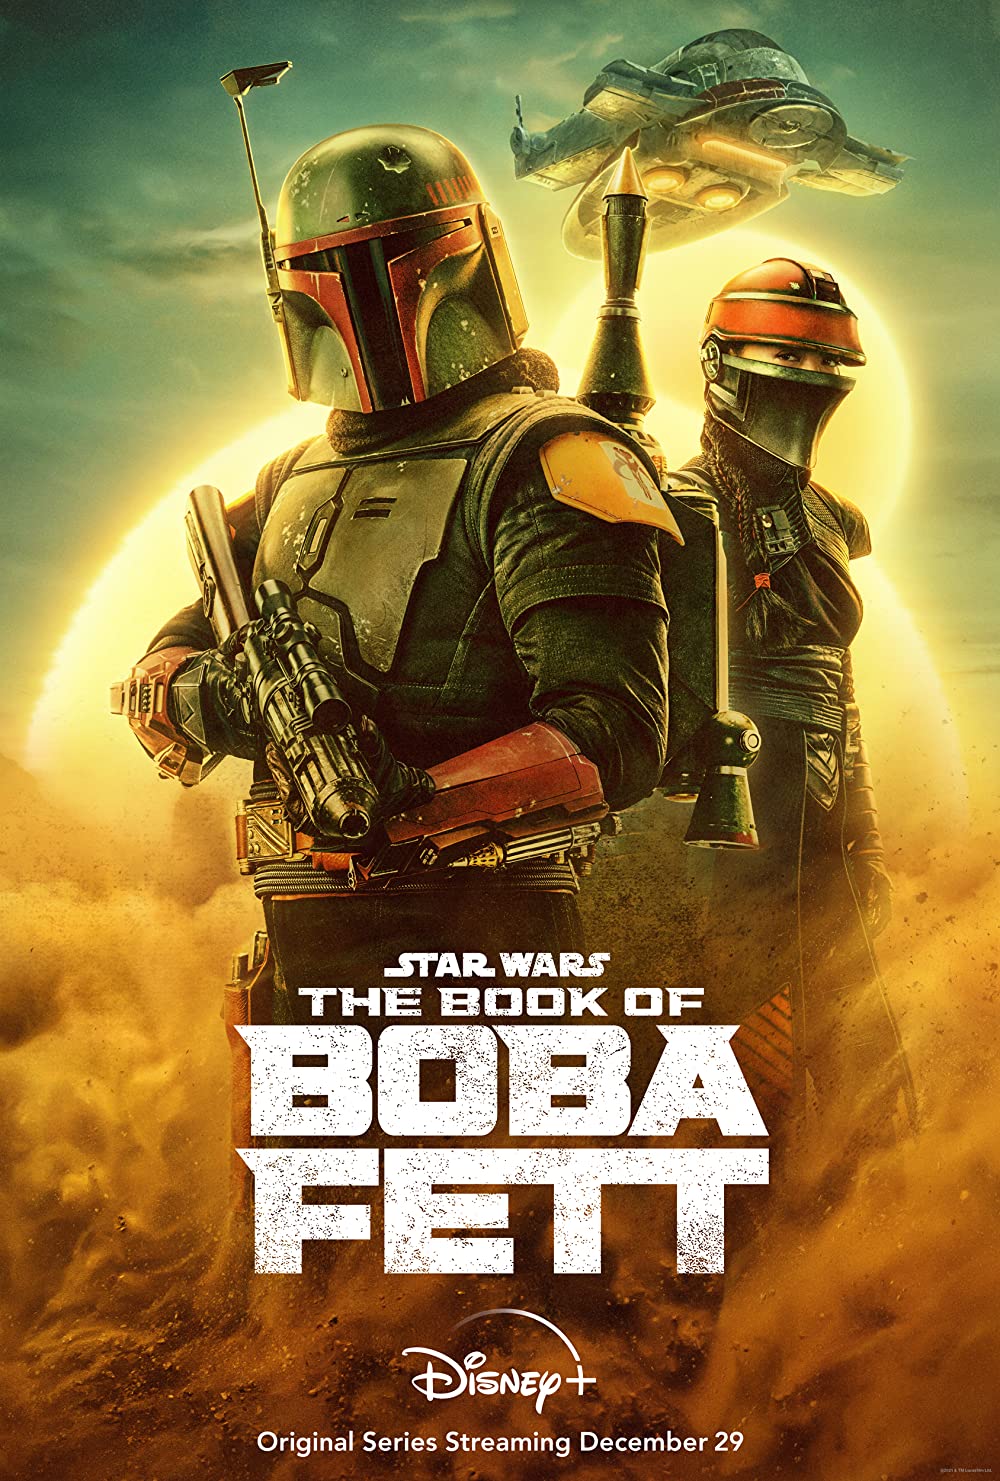 The Book of Boba Fett 2022 S01EP04 Hindi Dubbed ORG DSNP Series 1080p HDRip ESub 1.2GB Download